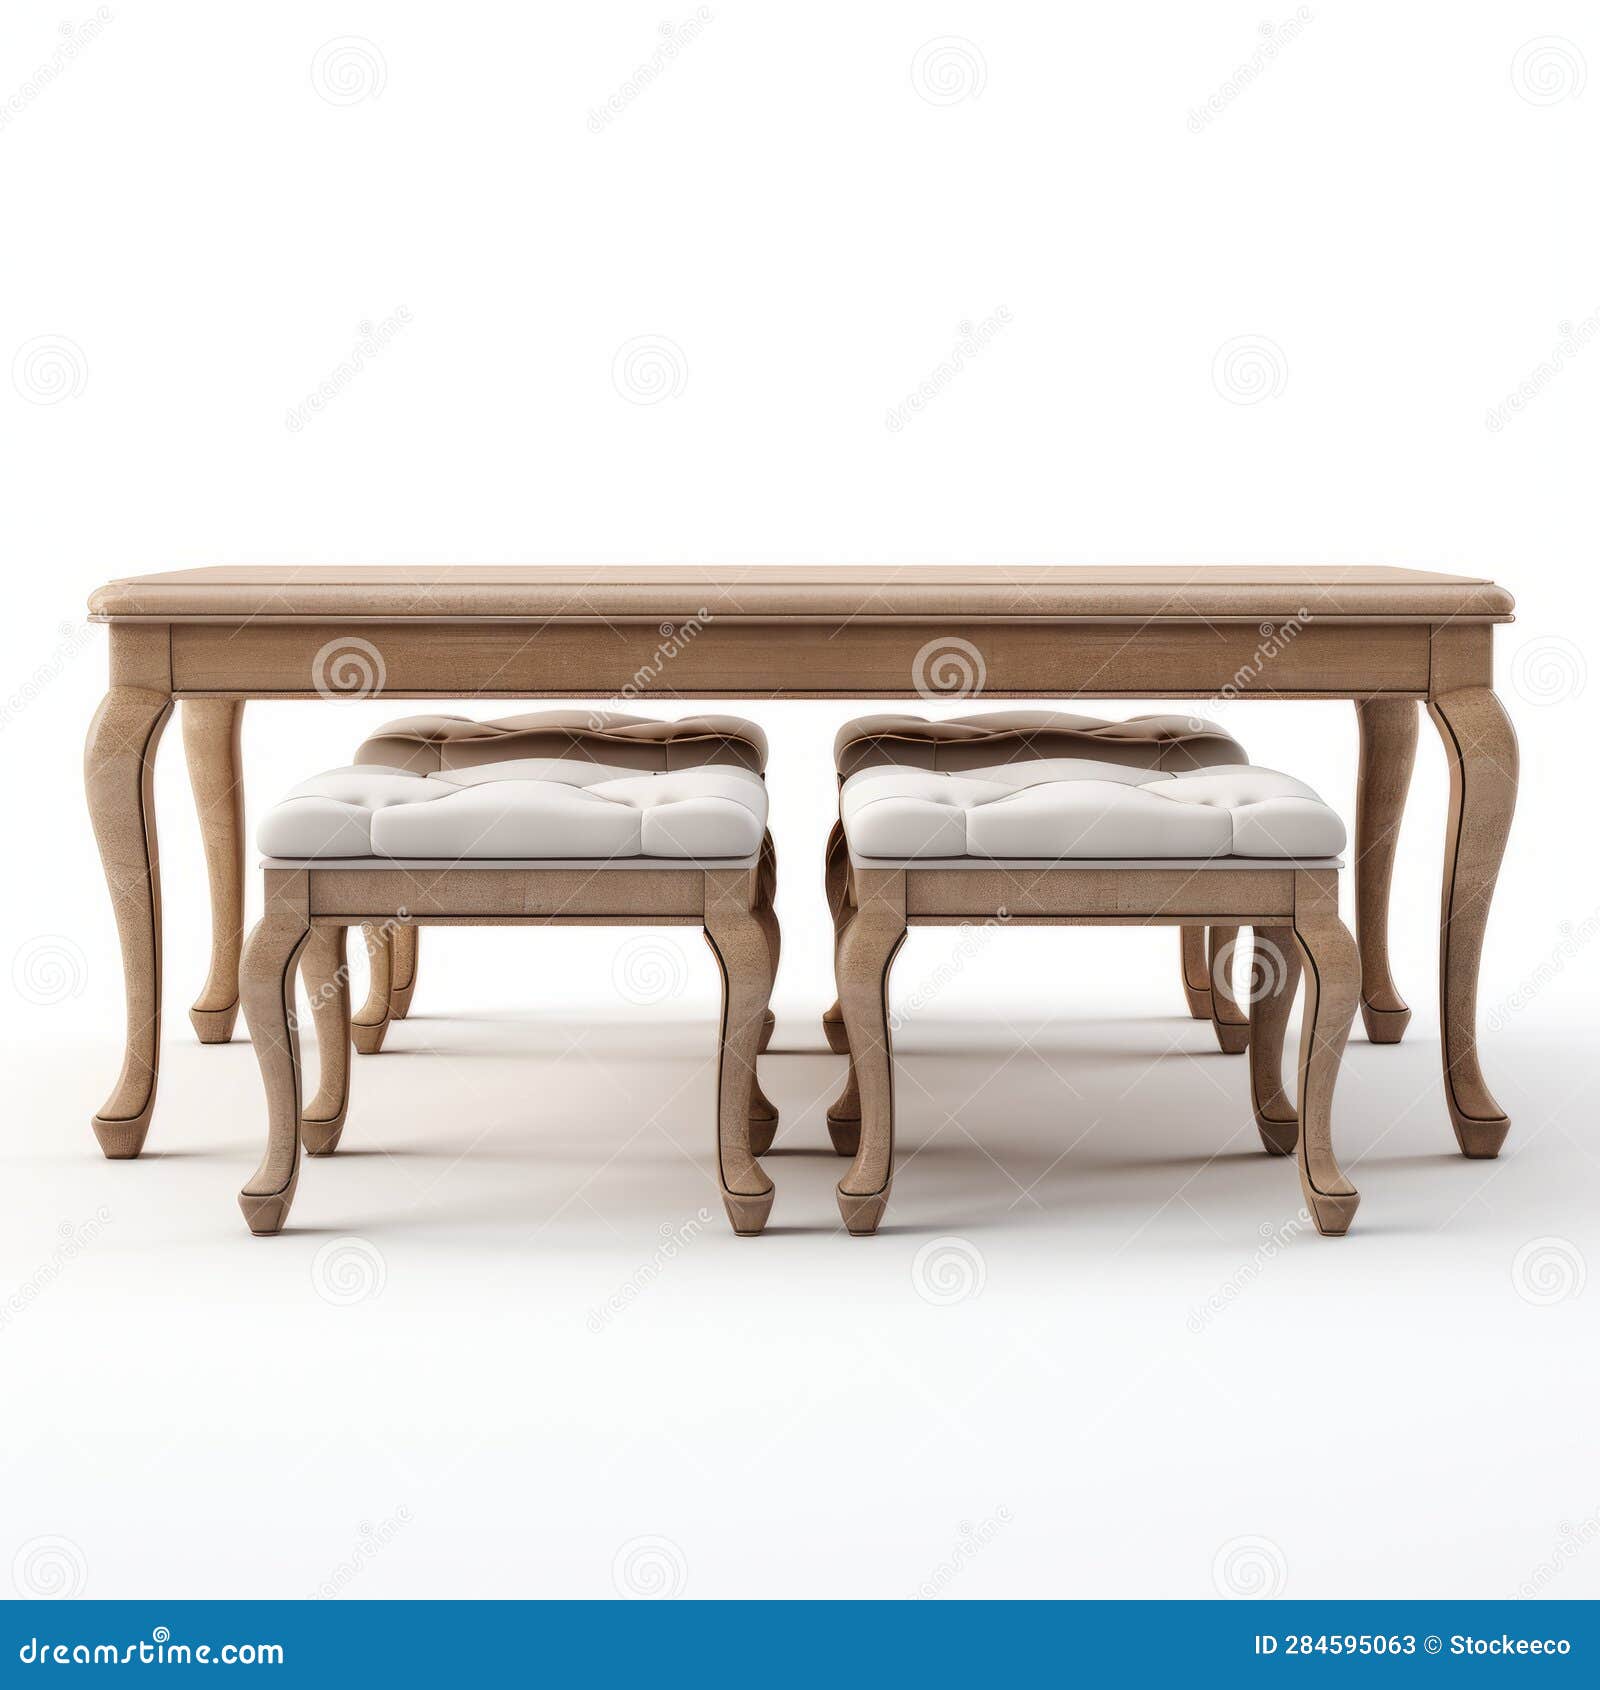 realistic 3d render of barroco dining table with stools